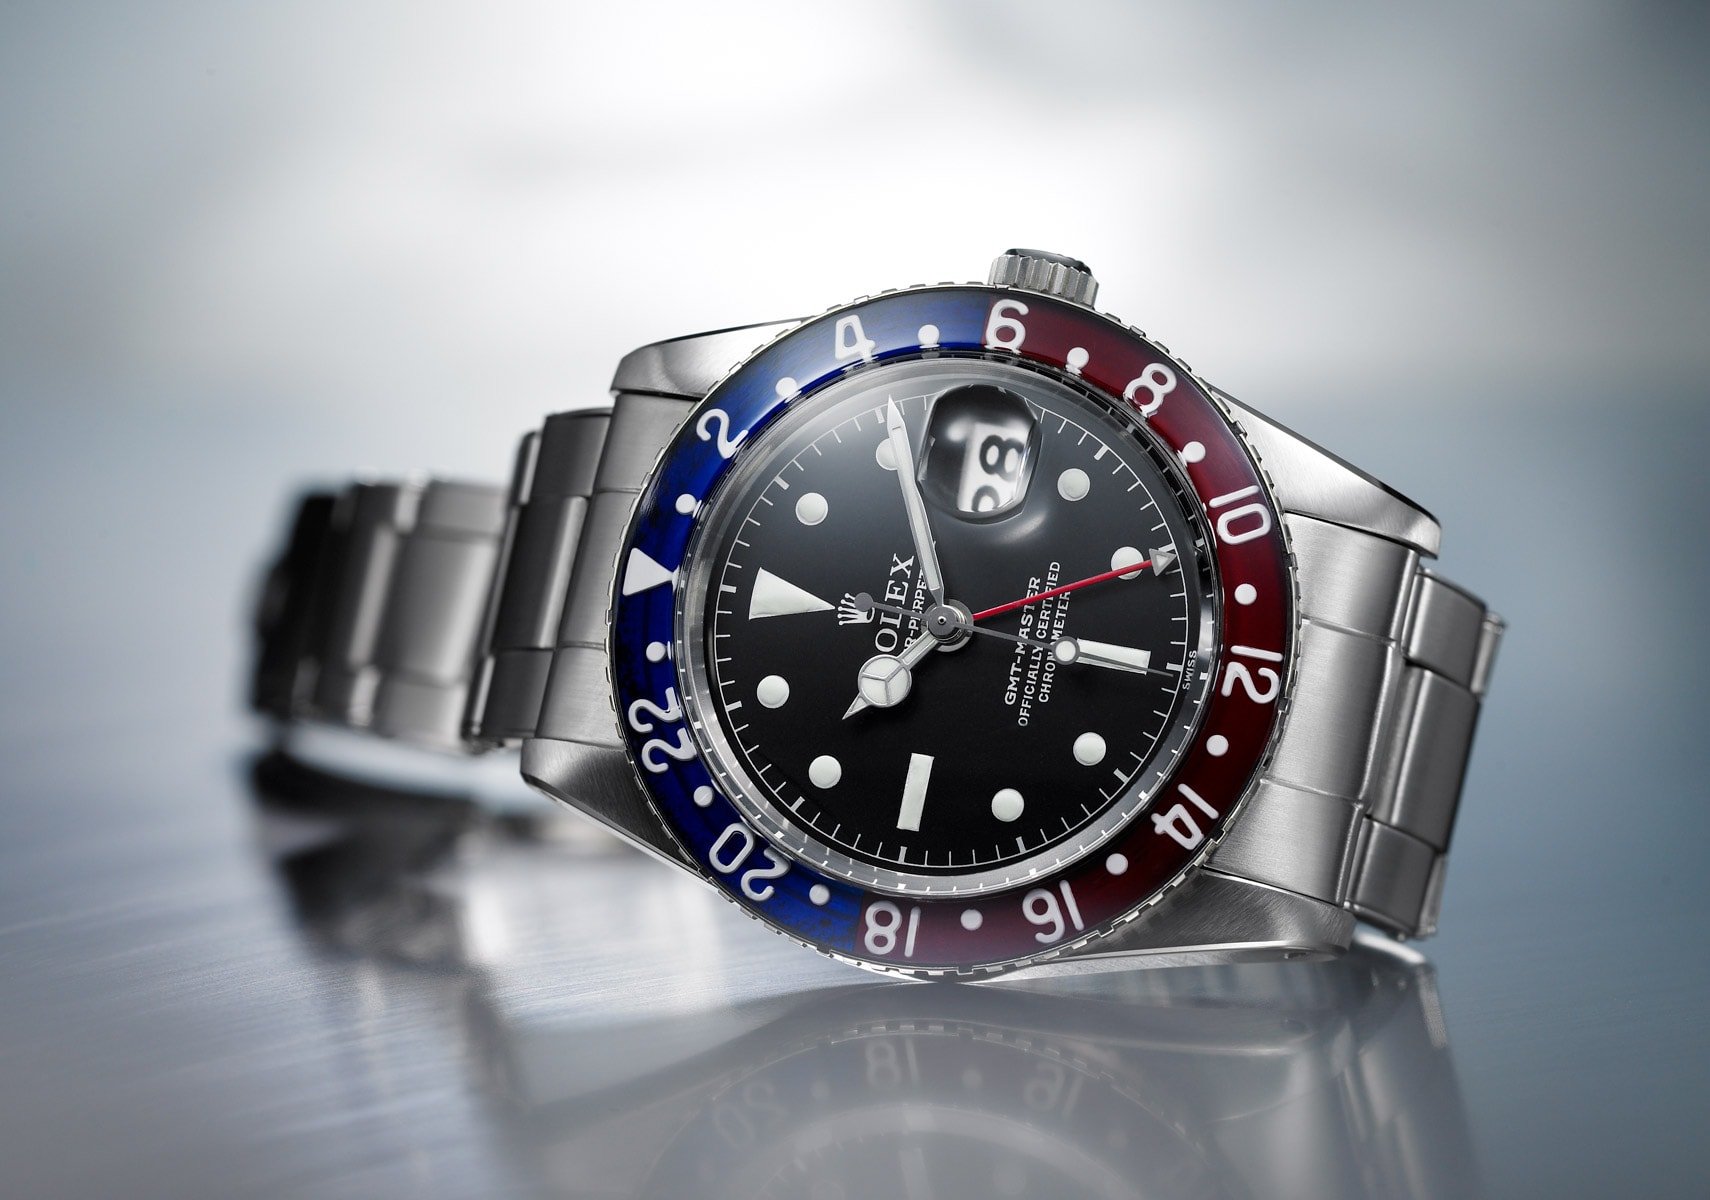 Oyster Perpetual GMT-Master II - The cosmopolitan watch